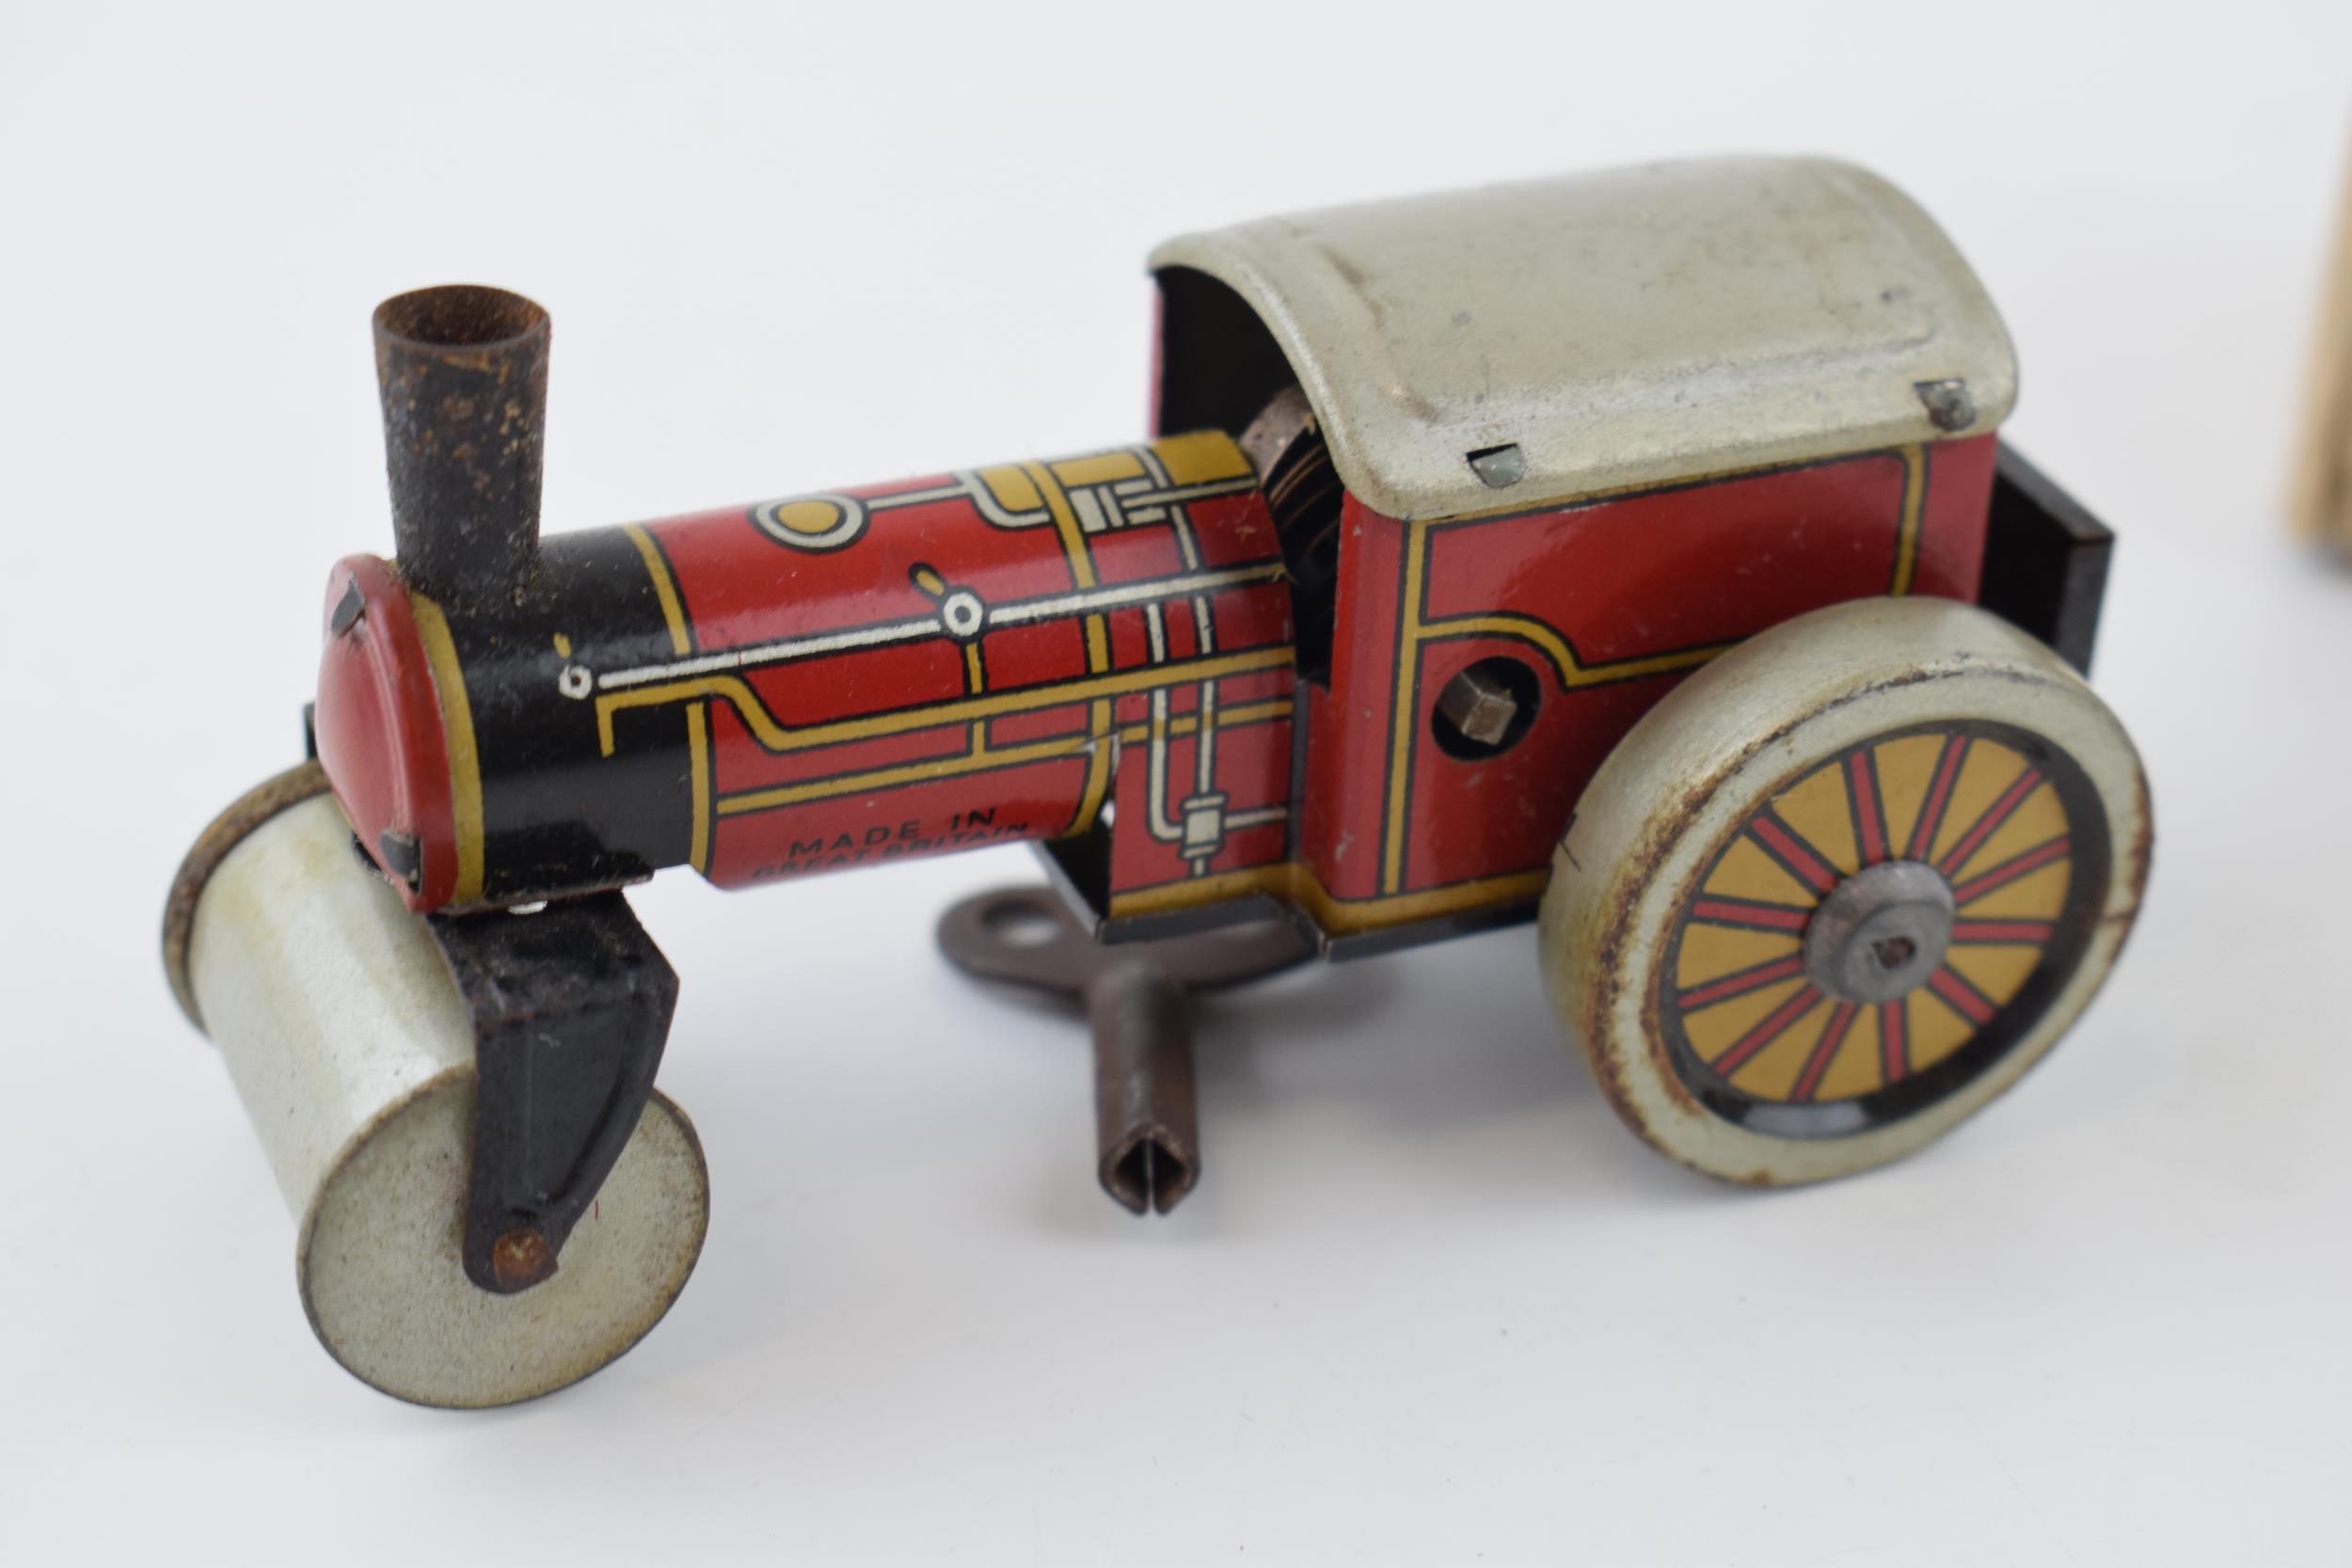 Boxed Brimtoy 'British Made' 9/501 clockwork 'Steamer' tin toy in working order with key. Height - Image 3 of 3